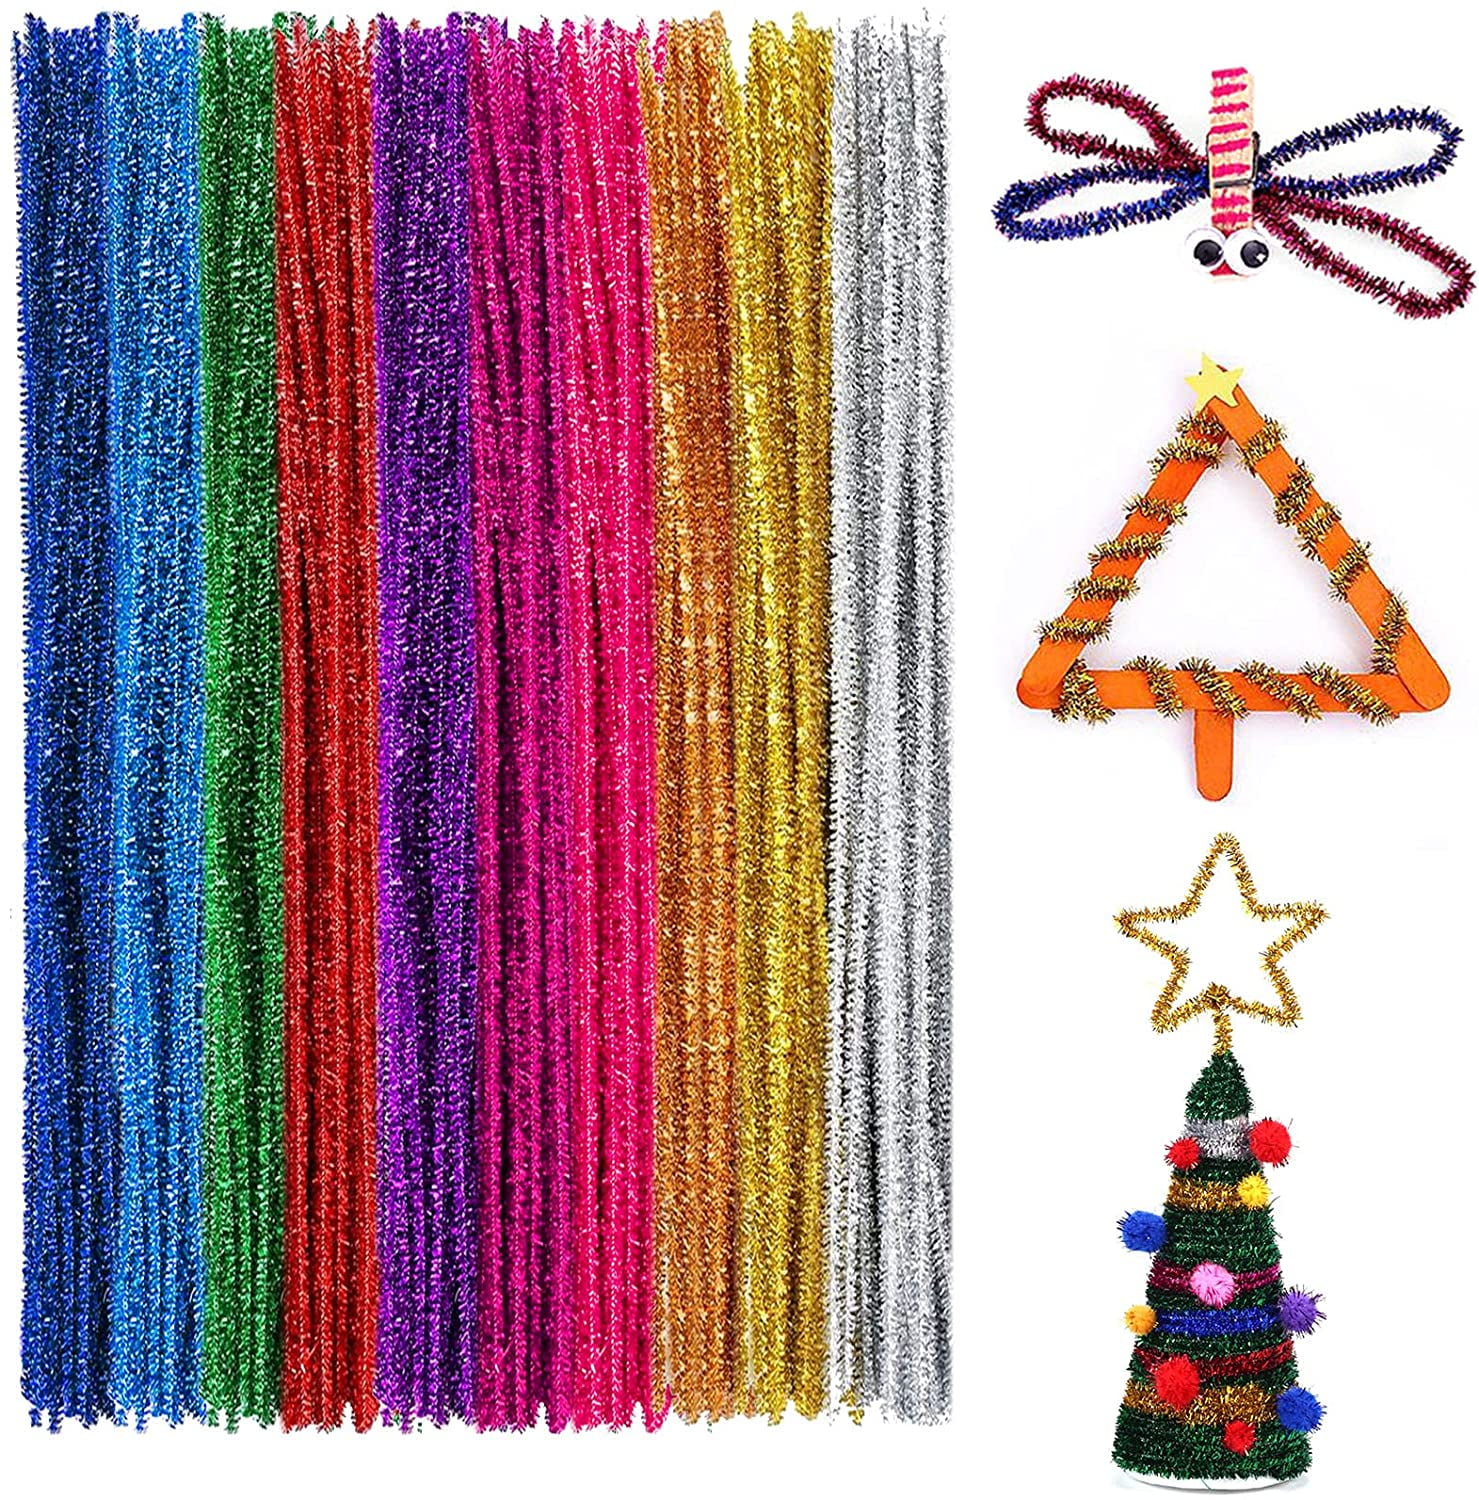 Pipe Cleaners Chenille Stems 1050 Pieces 30 Assorted Colors for Craft Arts Creative DIY Projects Decorations 6mm x 12inch Fuzzy Colored Chenille Stem Sticks Set Craft Supplies for Kids and Adults 